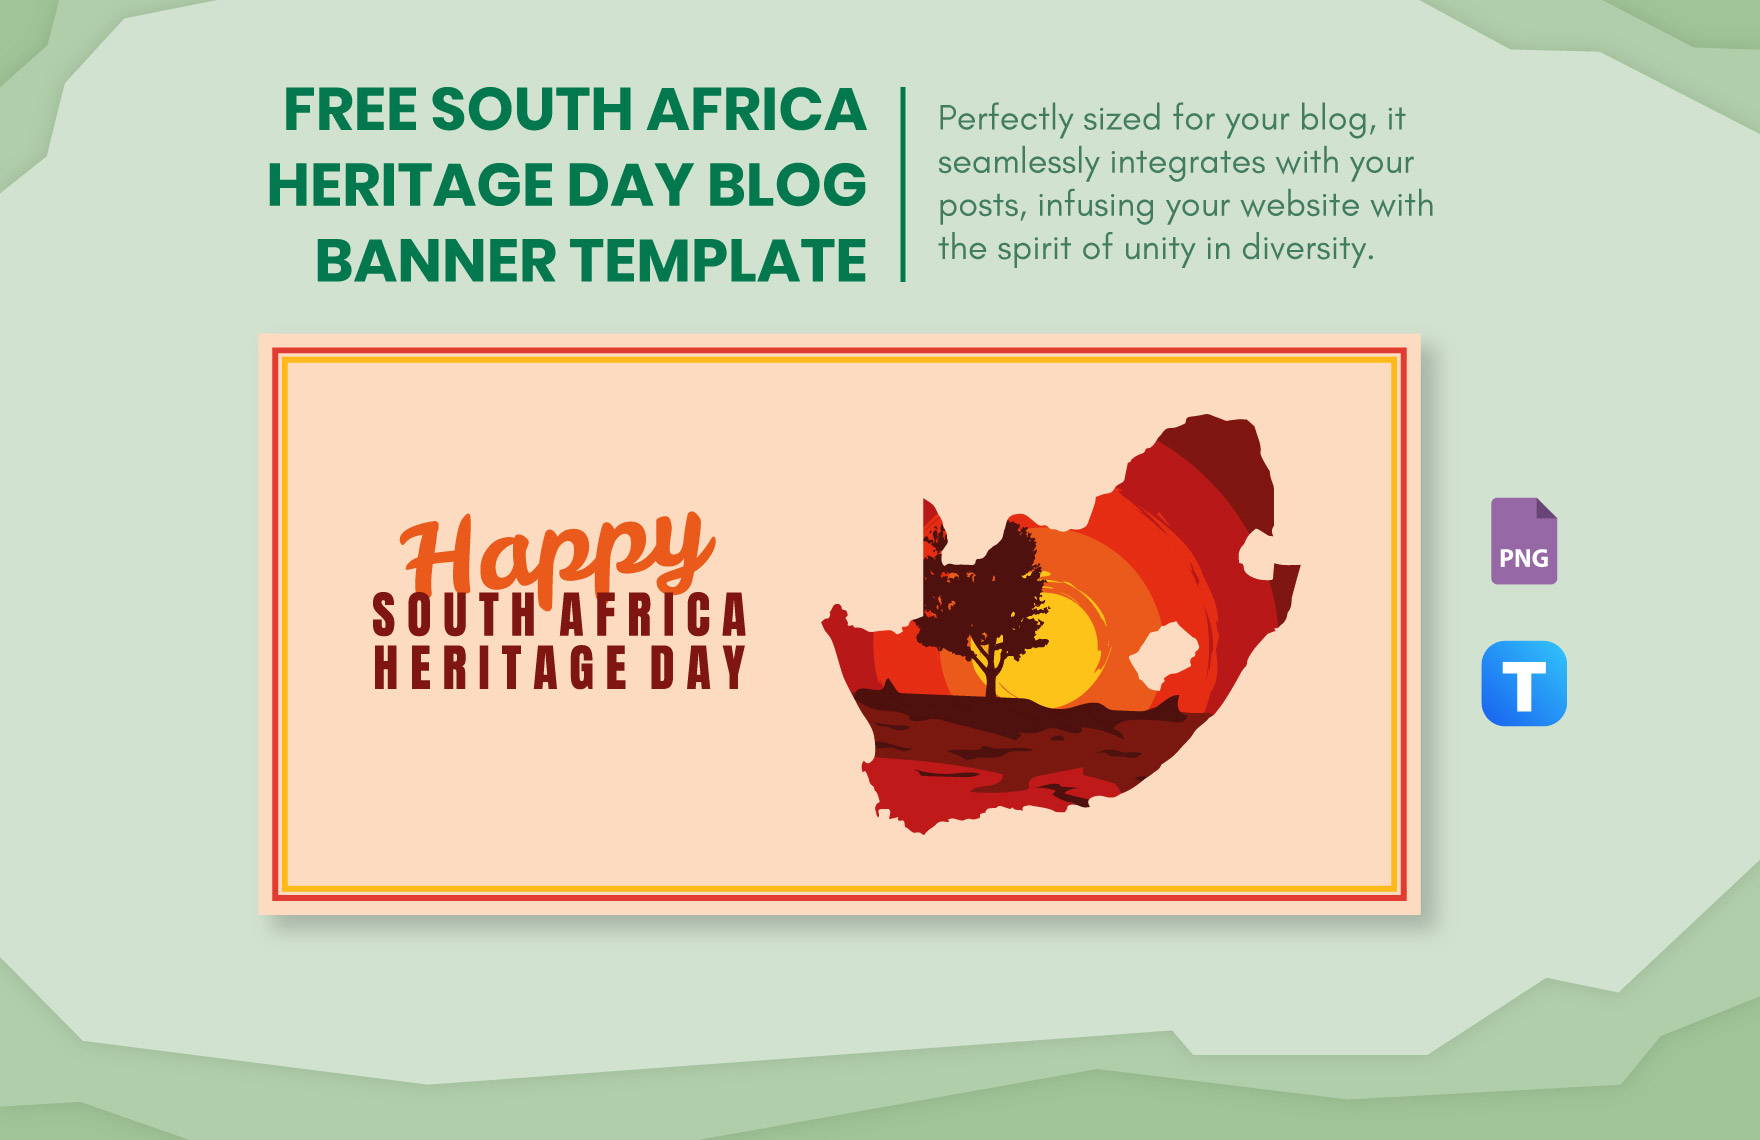 South Africa Heritage Day Blog Banner Template